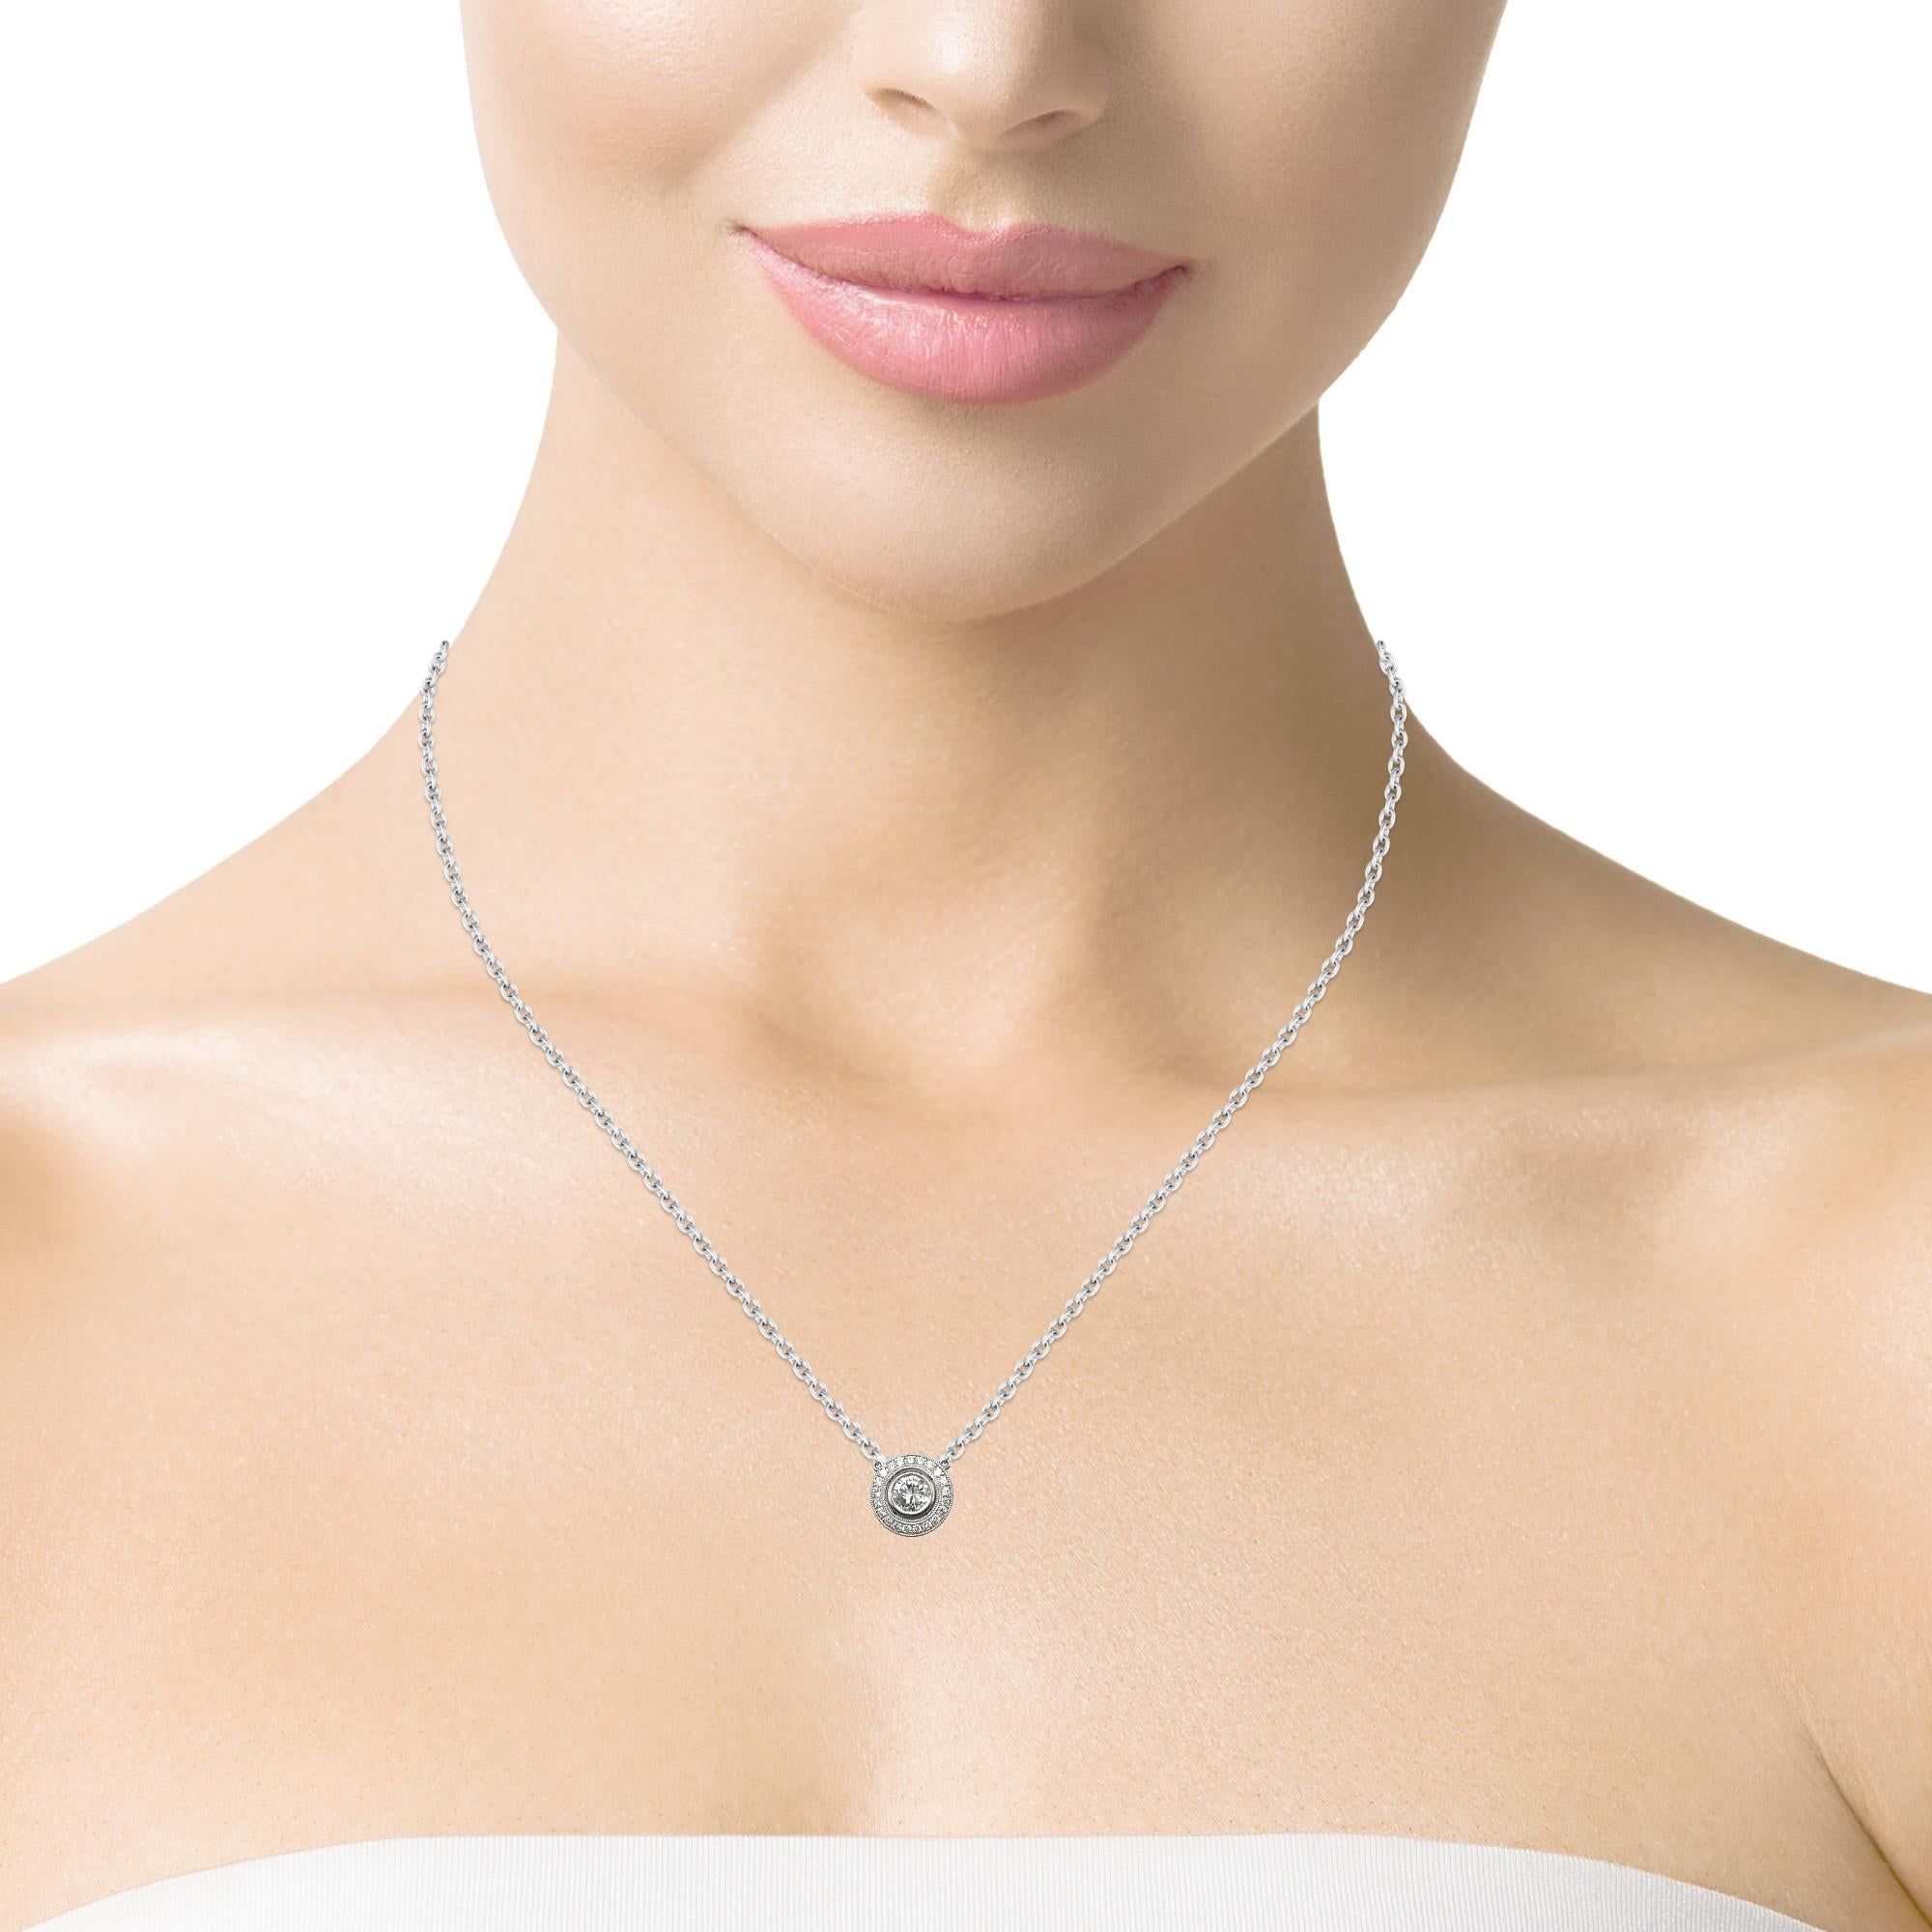 .71 Carat Total Diamond and Diamond Halo Necklace in Platinum, 17 Inches For Sale 3